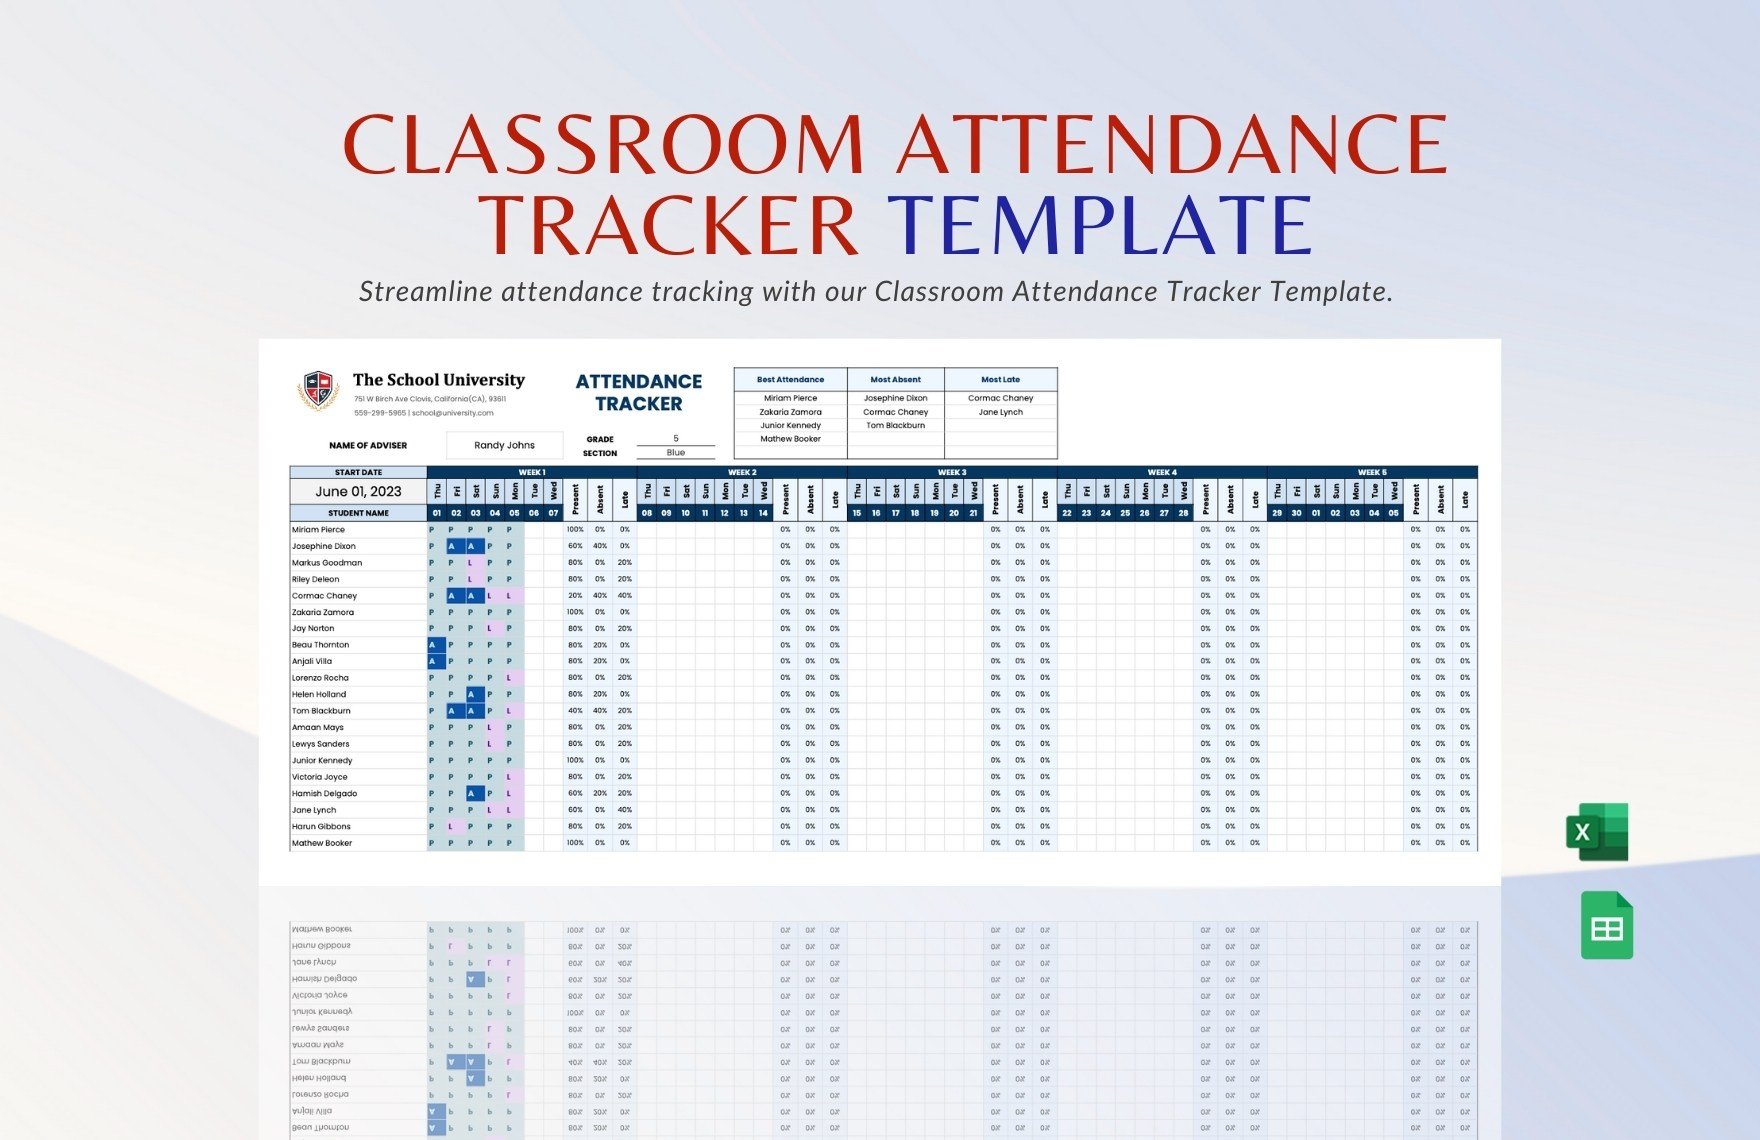 Classroom Attendance Tracker Template in Excel, Google Sheets